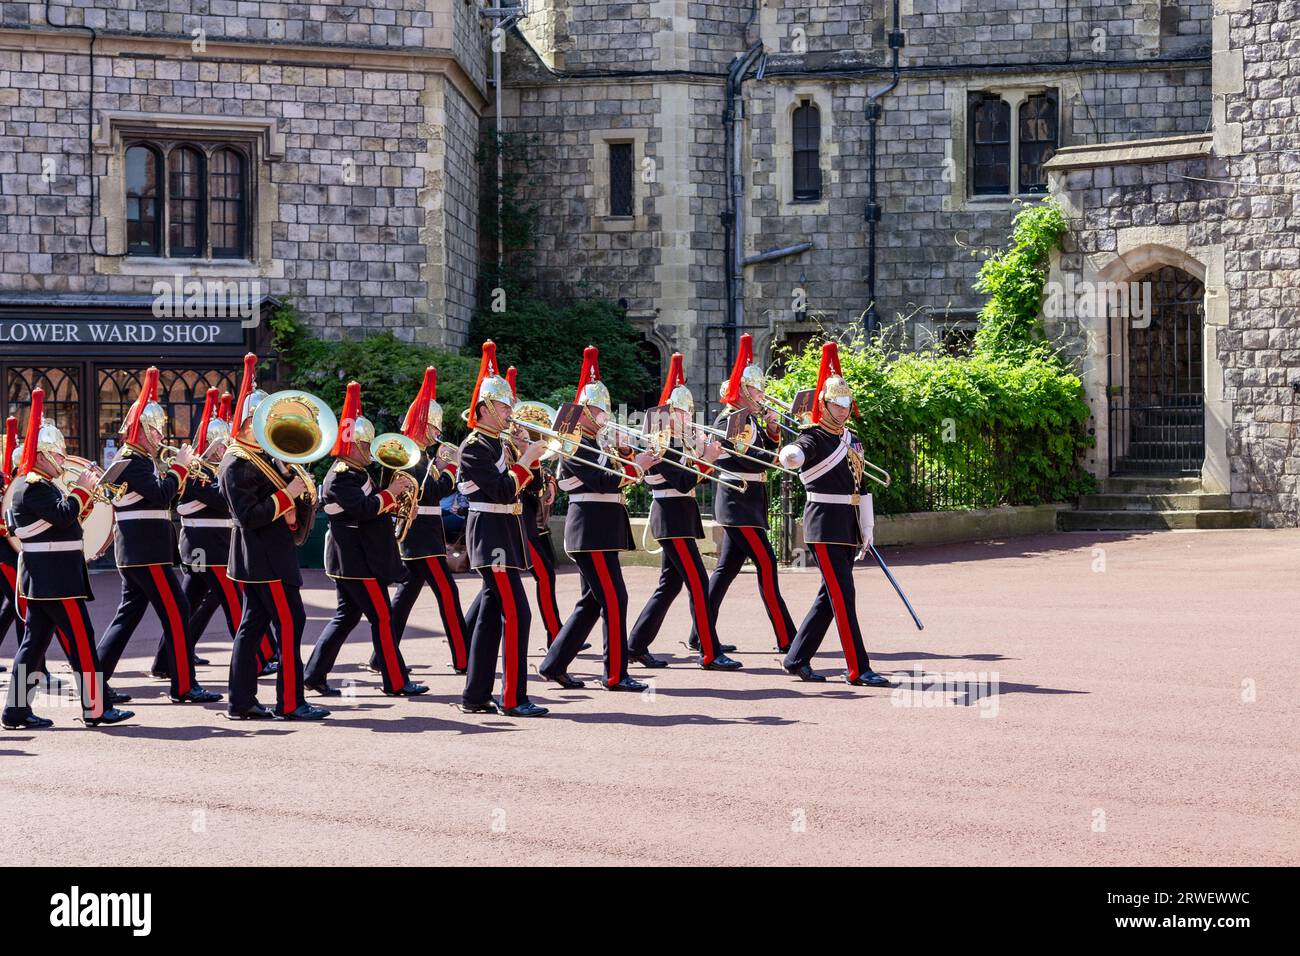 WINDSOR, GREAT BRITAIN - MAY 19, 2014: This is a military band at the ceremony of changing the guard of the Royal Guard at Windsor Castle. Stock Photo